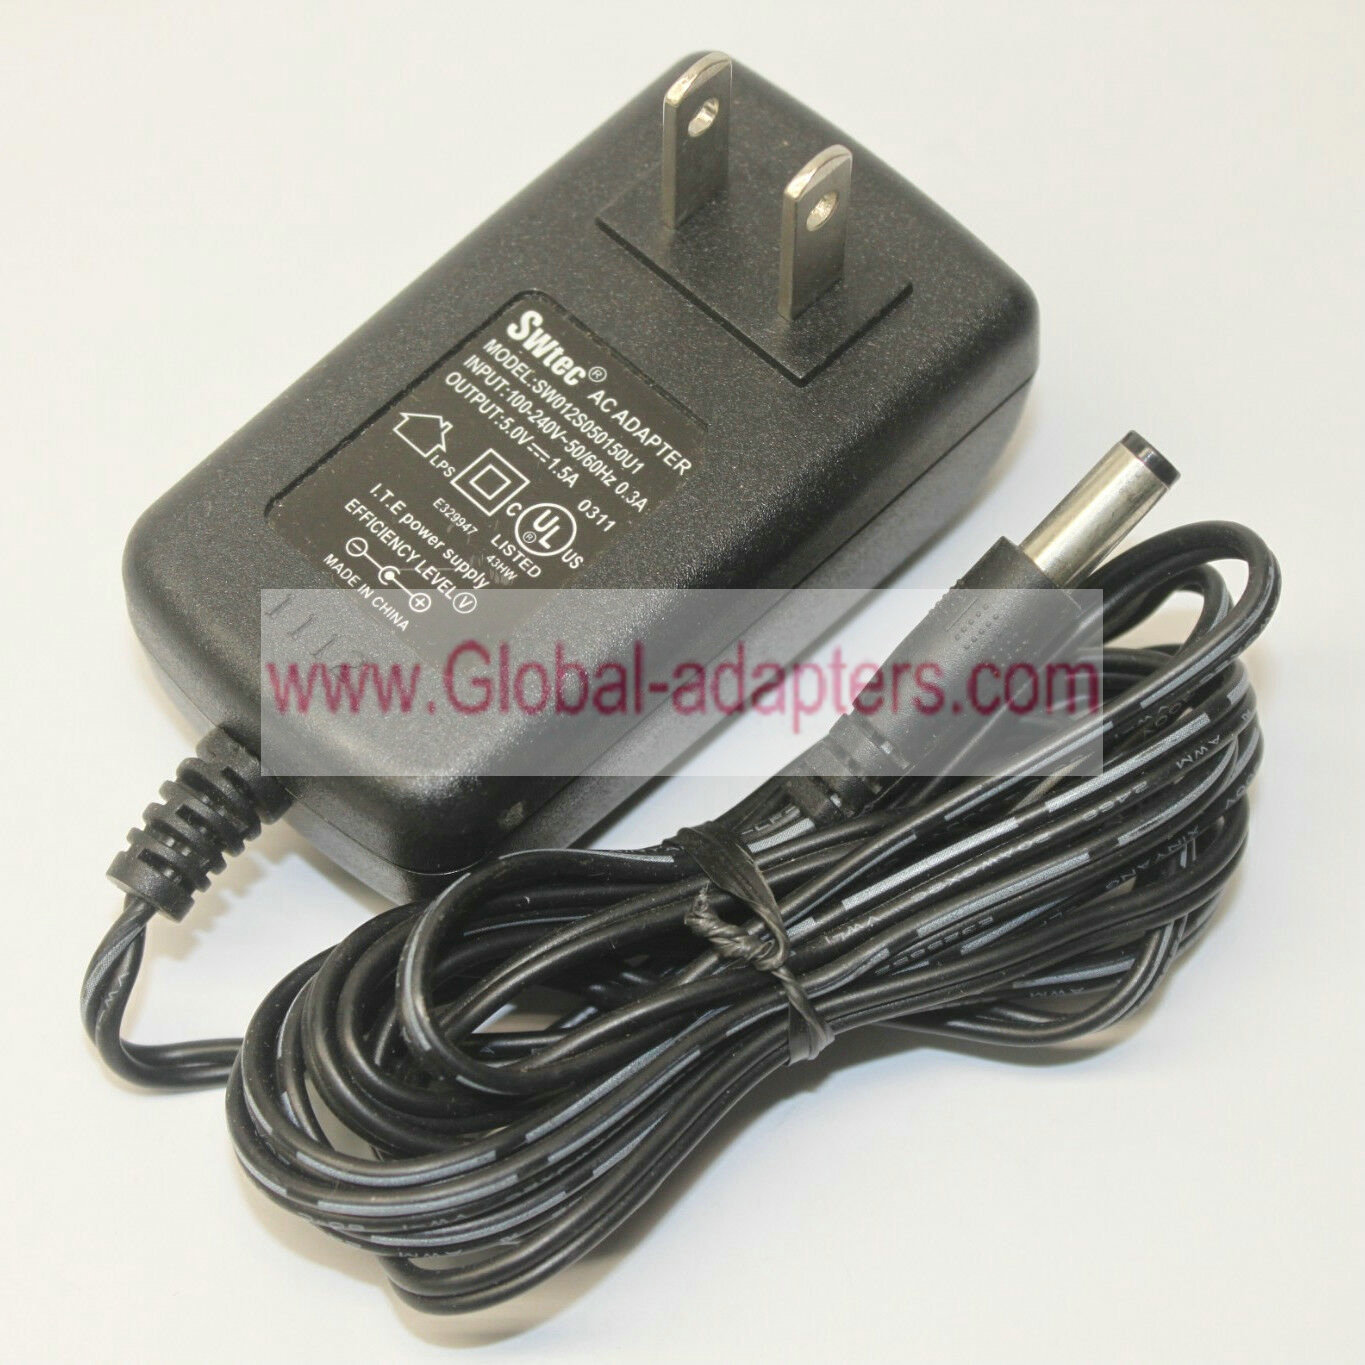 New Swtec SW012S050150U1 AC Adapter Power Supply Wall Charger 5V 1.5A